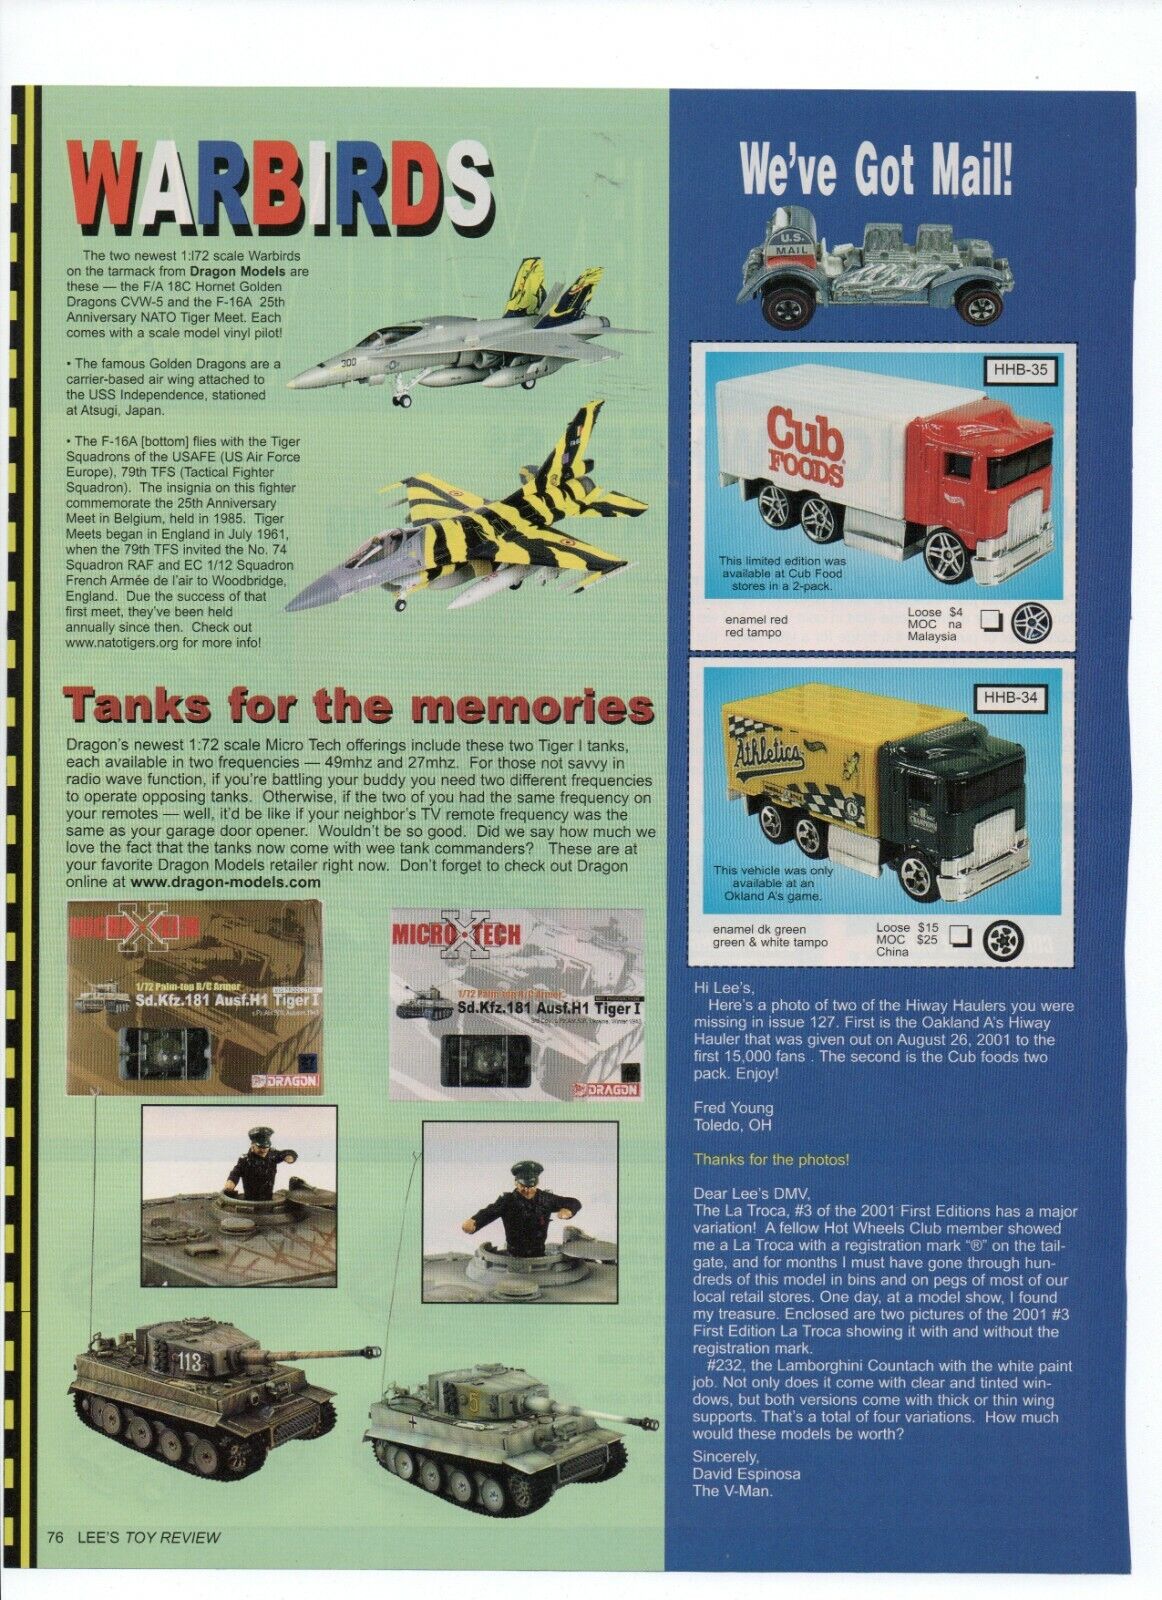 Dragon Warbirds Fighter Jets & Micro Tech Tanks - Vintage 2003 Toys PRINT AD